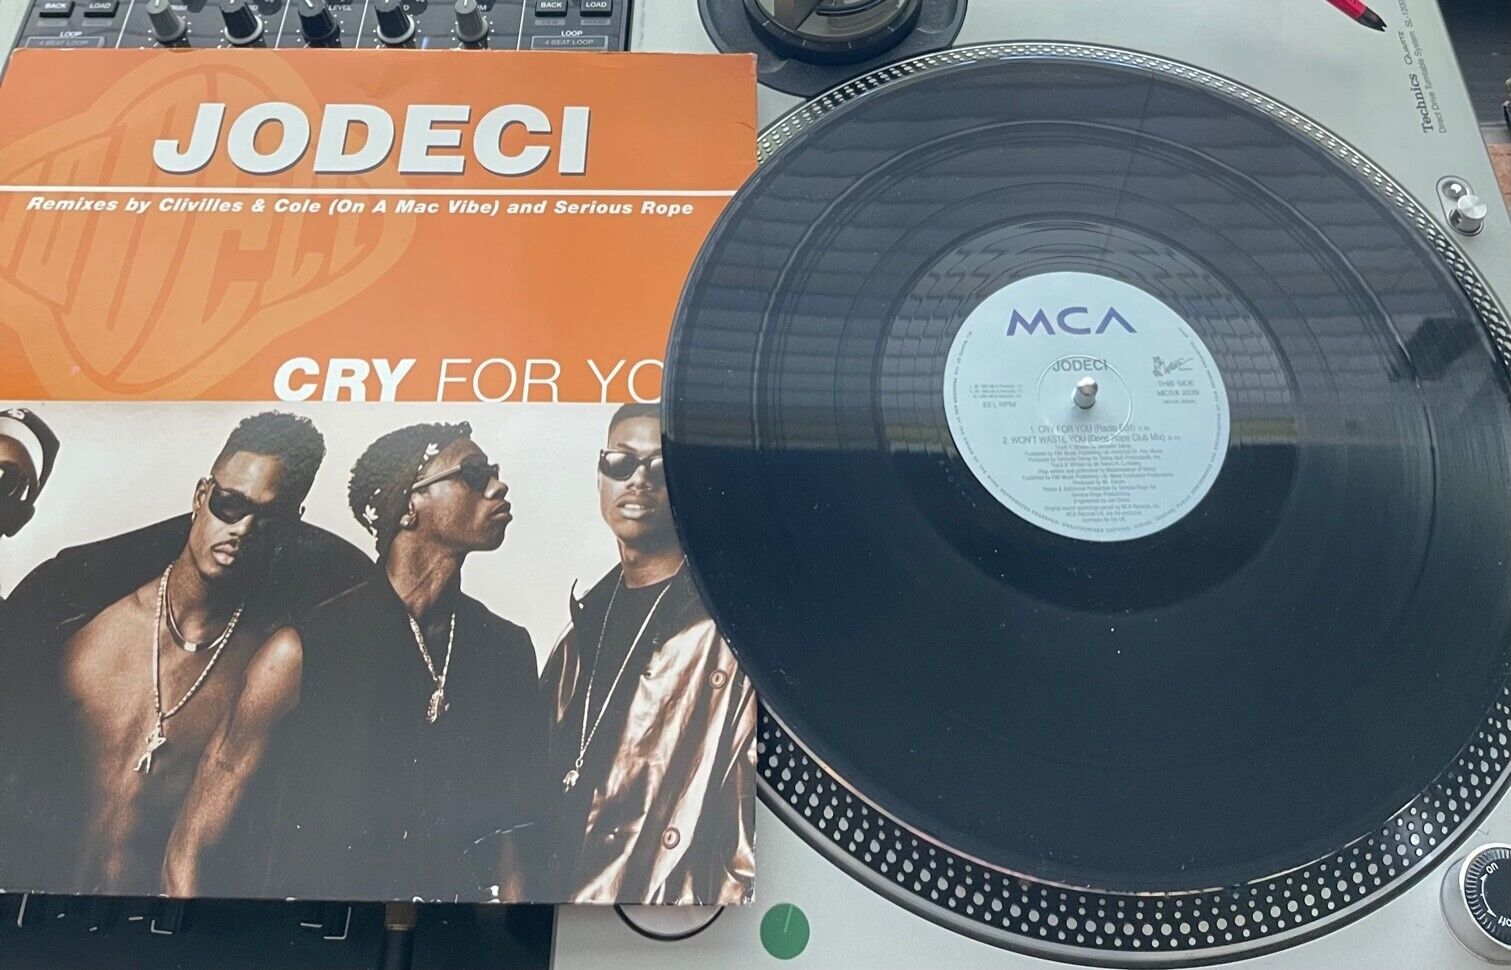 Jodeci – Cry For You Original 1994 UK Press 12" in Picture Cover VG+